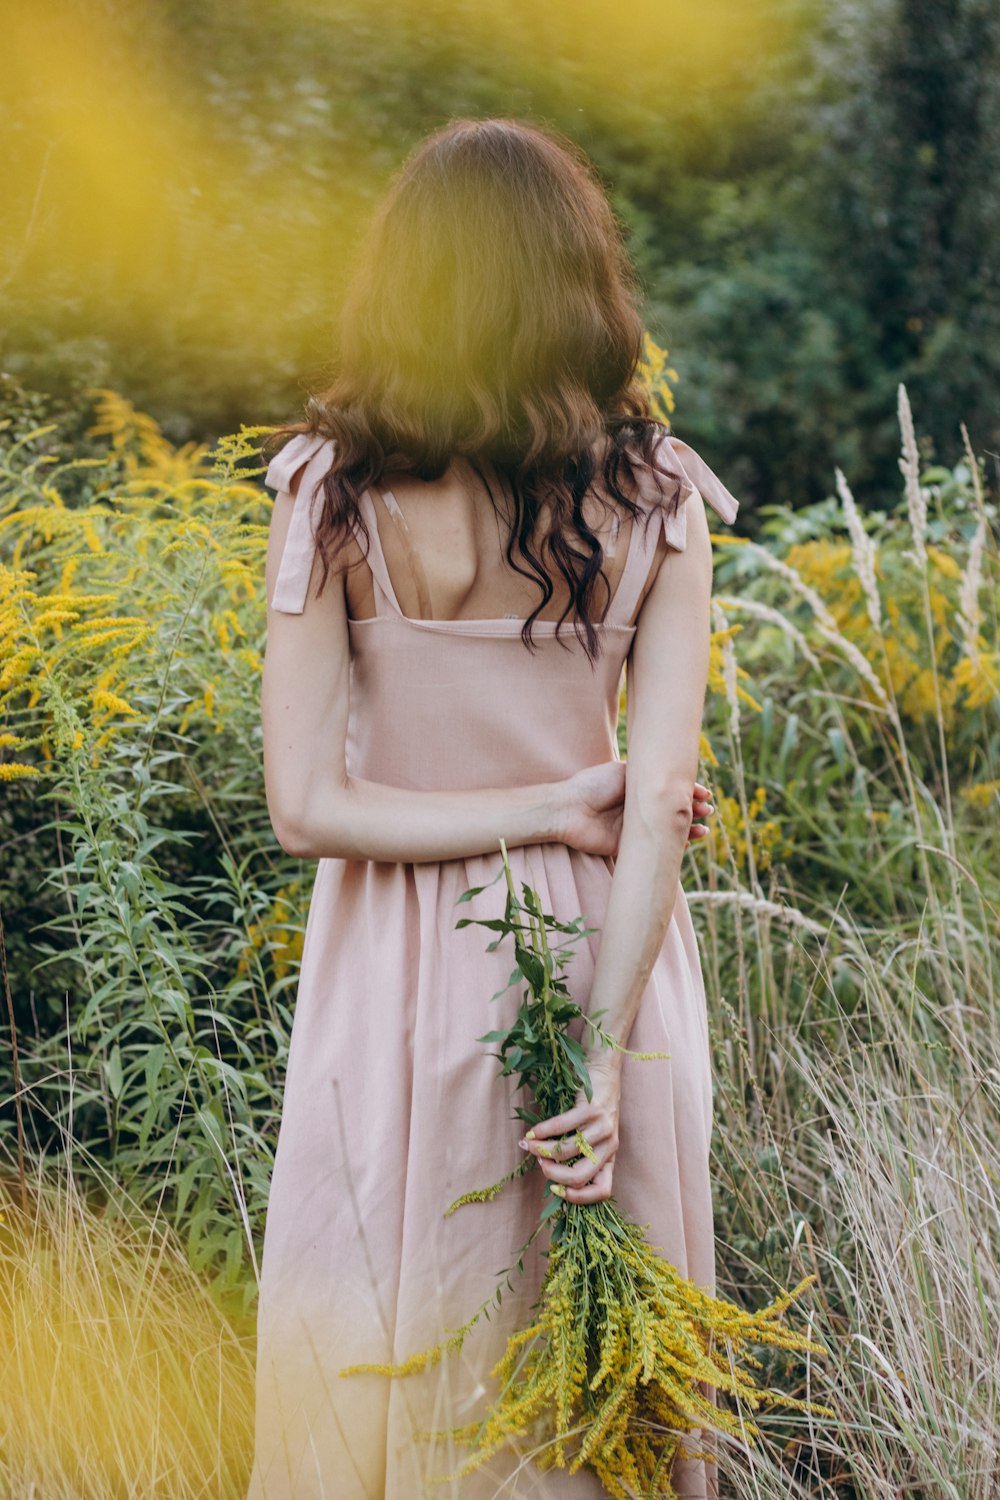 a woman in a pink dress standing in tall grass